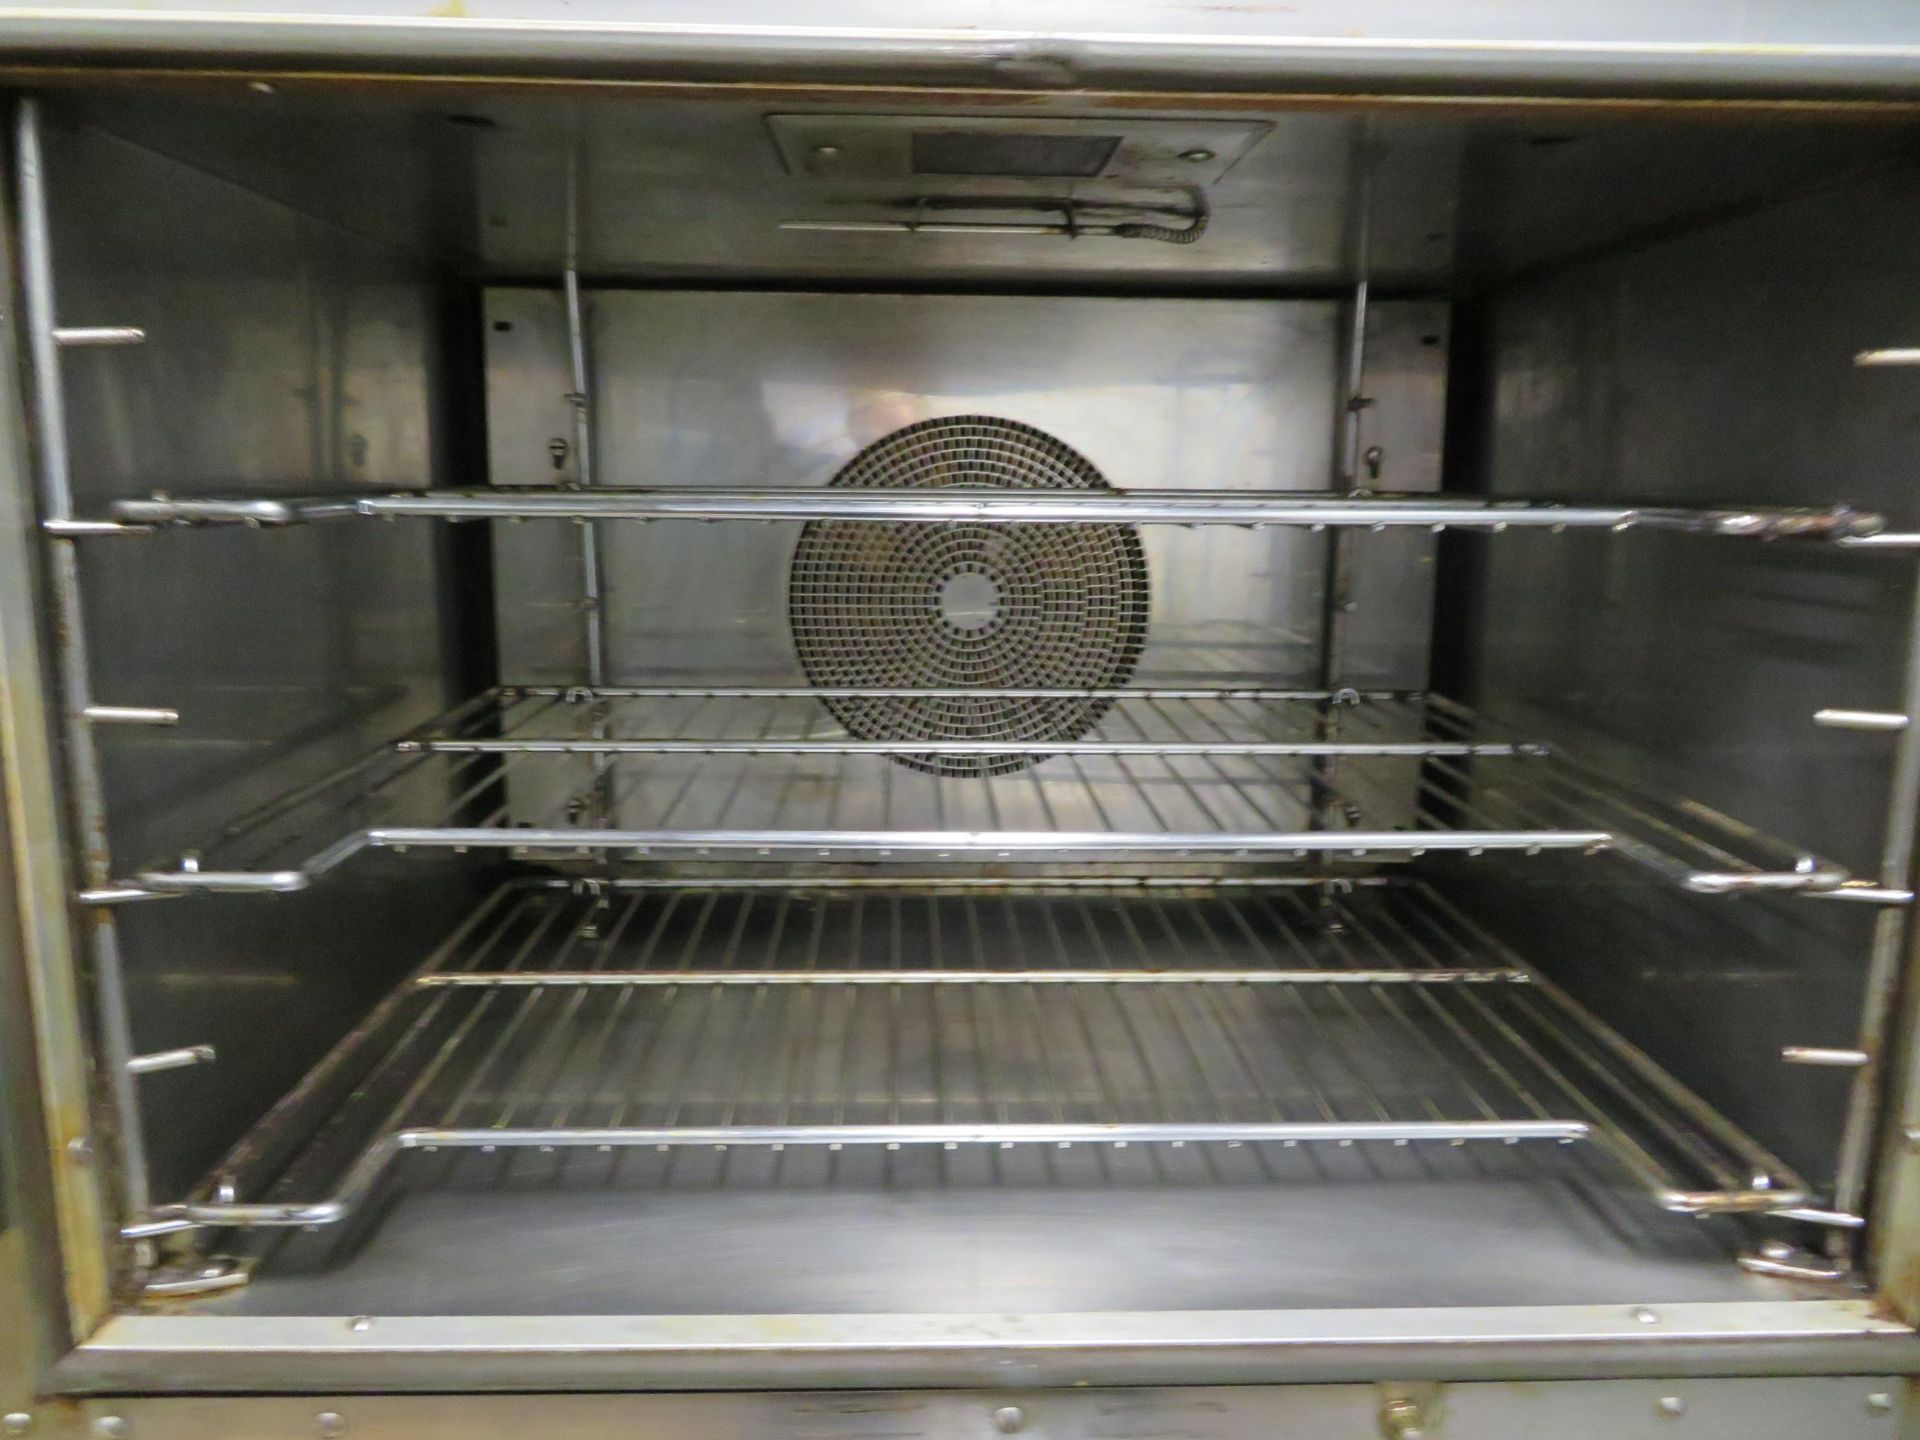 DOYON oven and proofer on wheels, Mod # JET AIR, approx. 32"w x 33"d x 71"h - Image 4 of 4